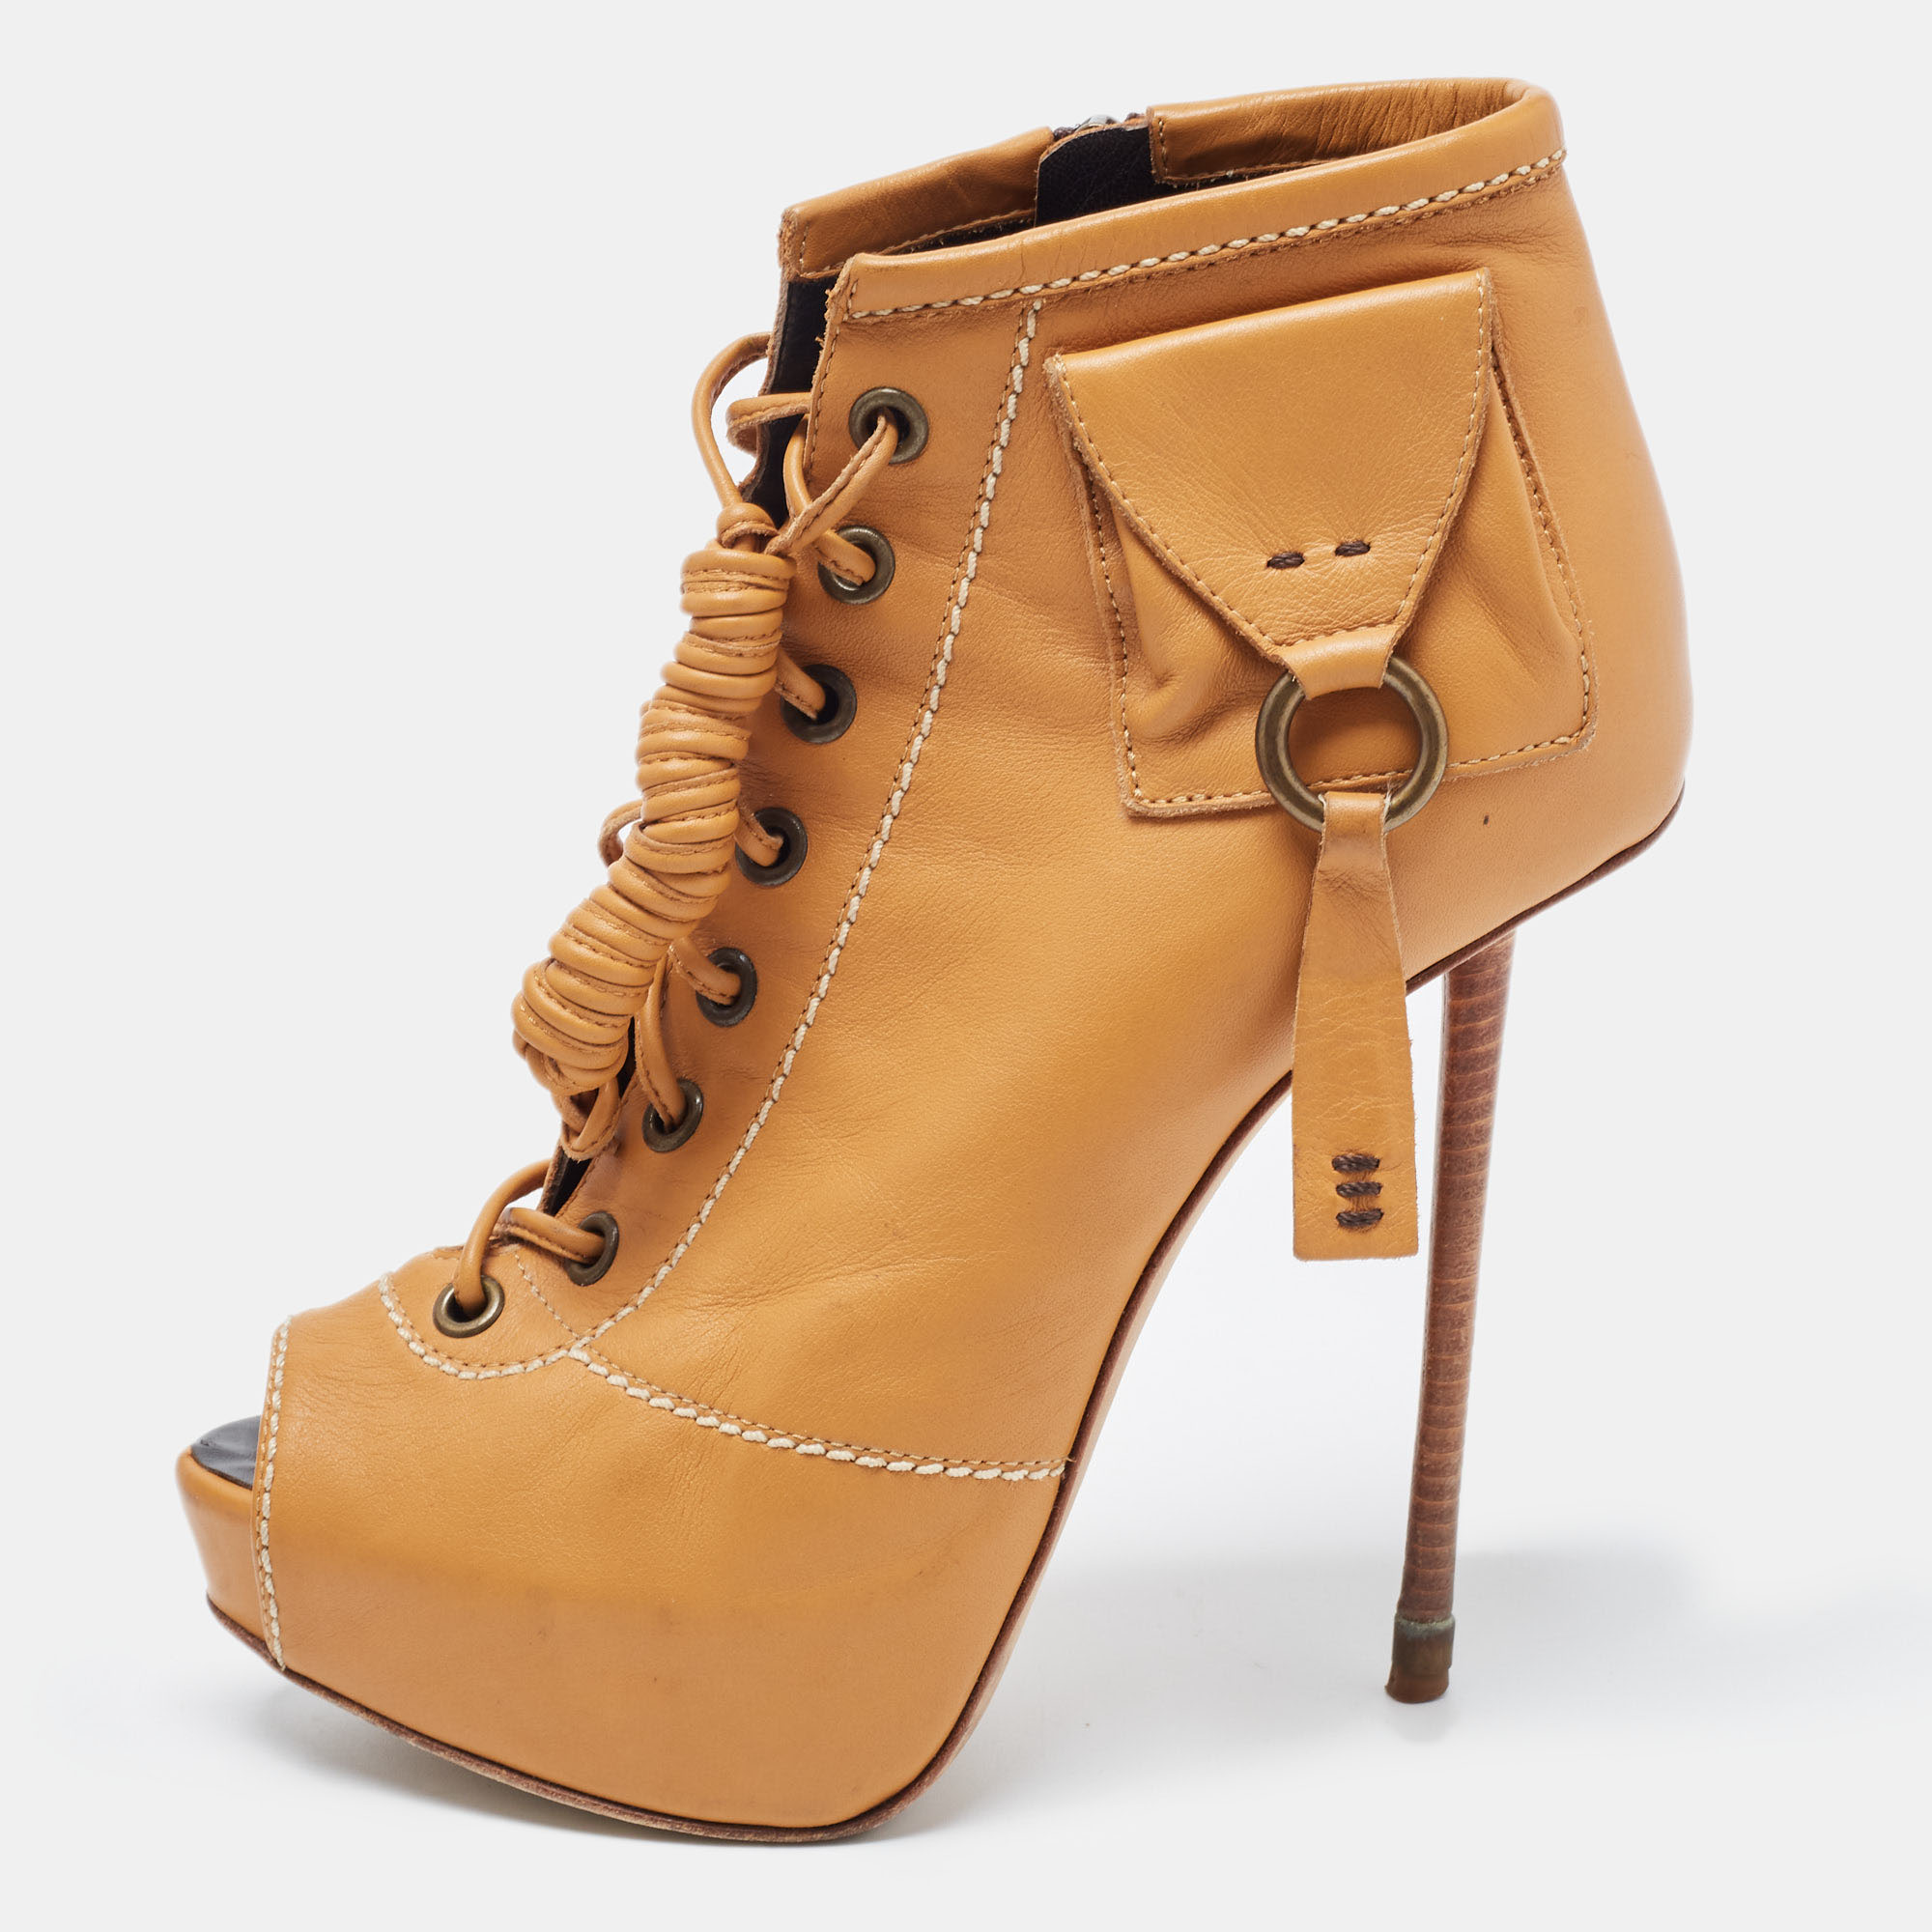 Giuseppe Zanotti Brown Leather Peep Toe Lace Up Ankle Boots Size 36